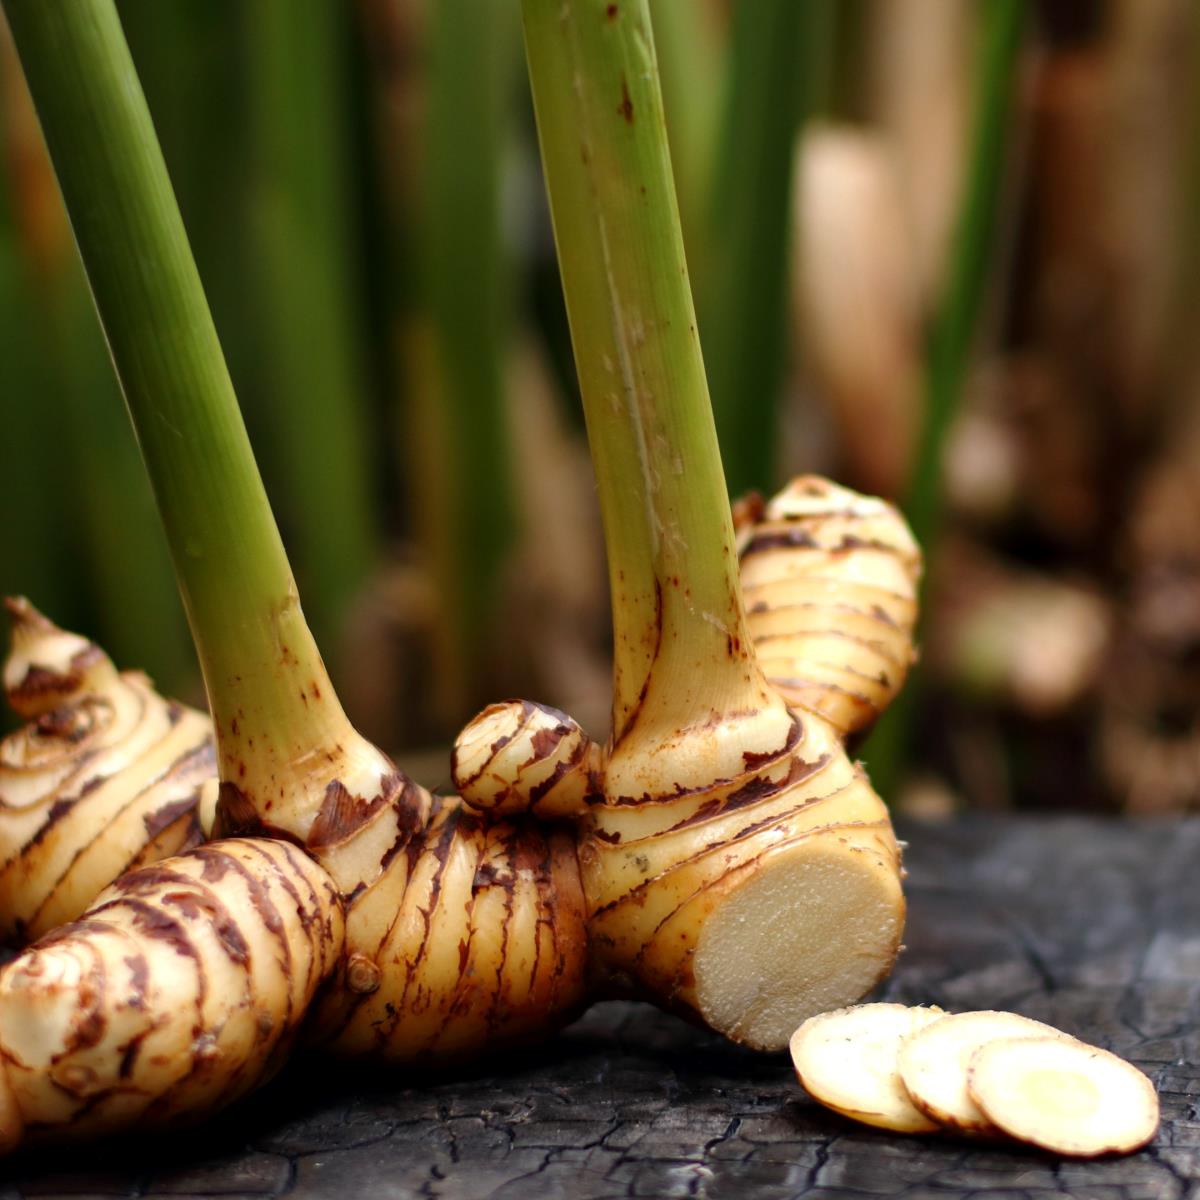 Galangal benefits health food substitute natural nutrition comments spiceography